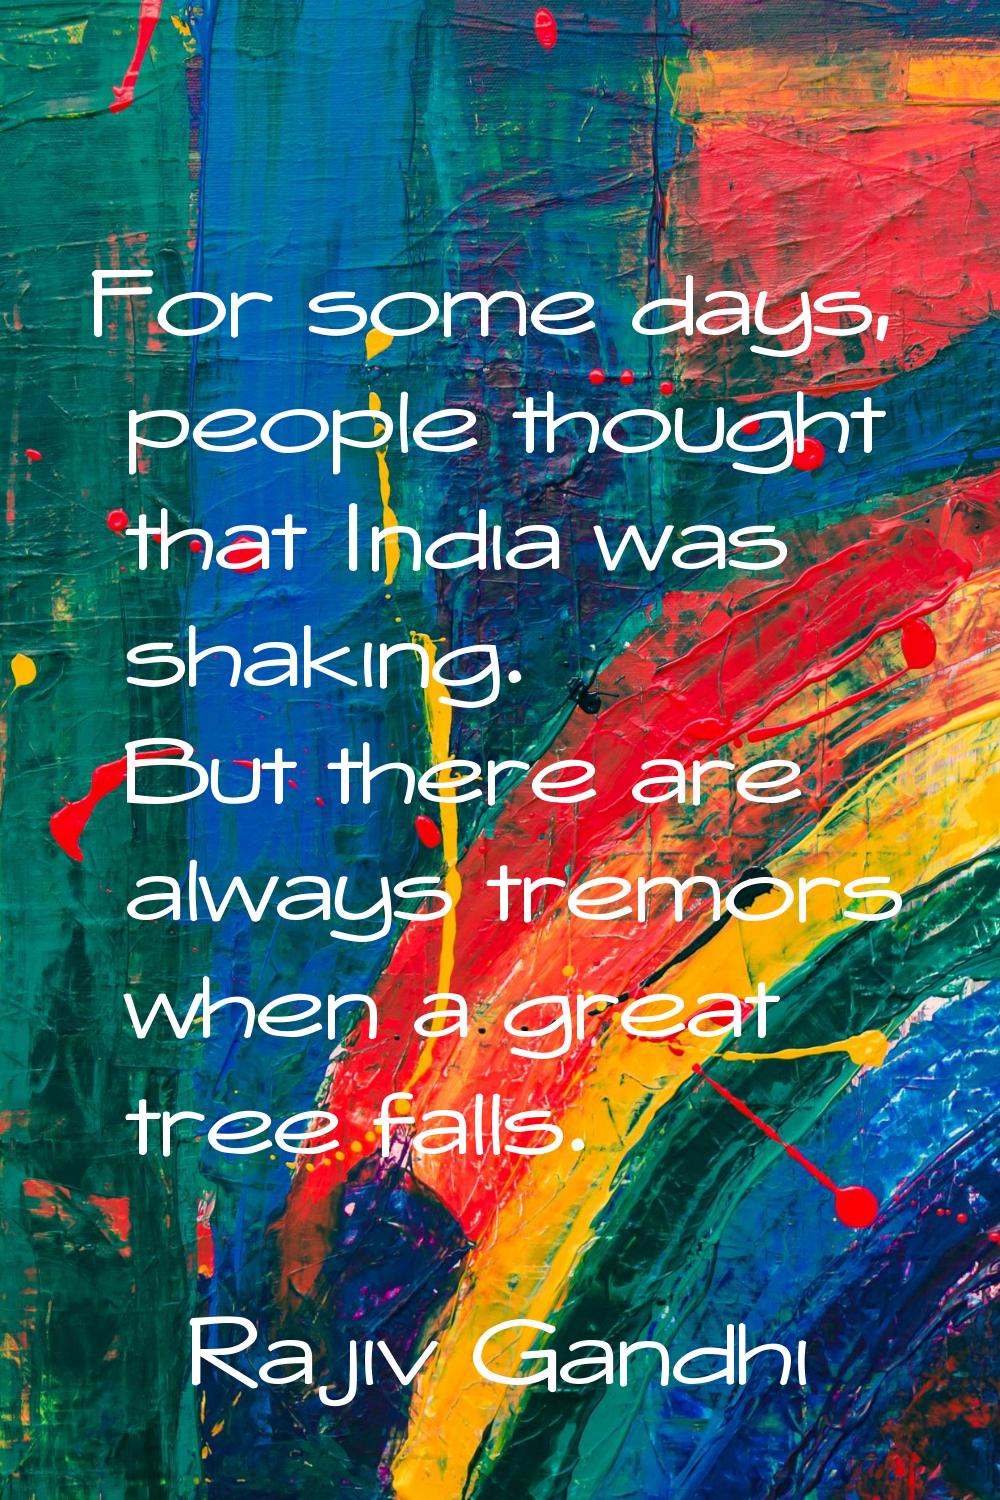 For some days, people thought that India was shaking. But there are always tremors when a great tre